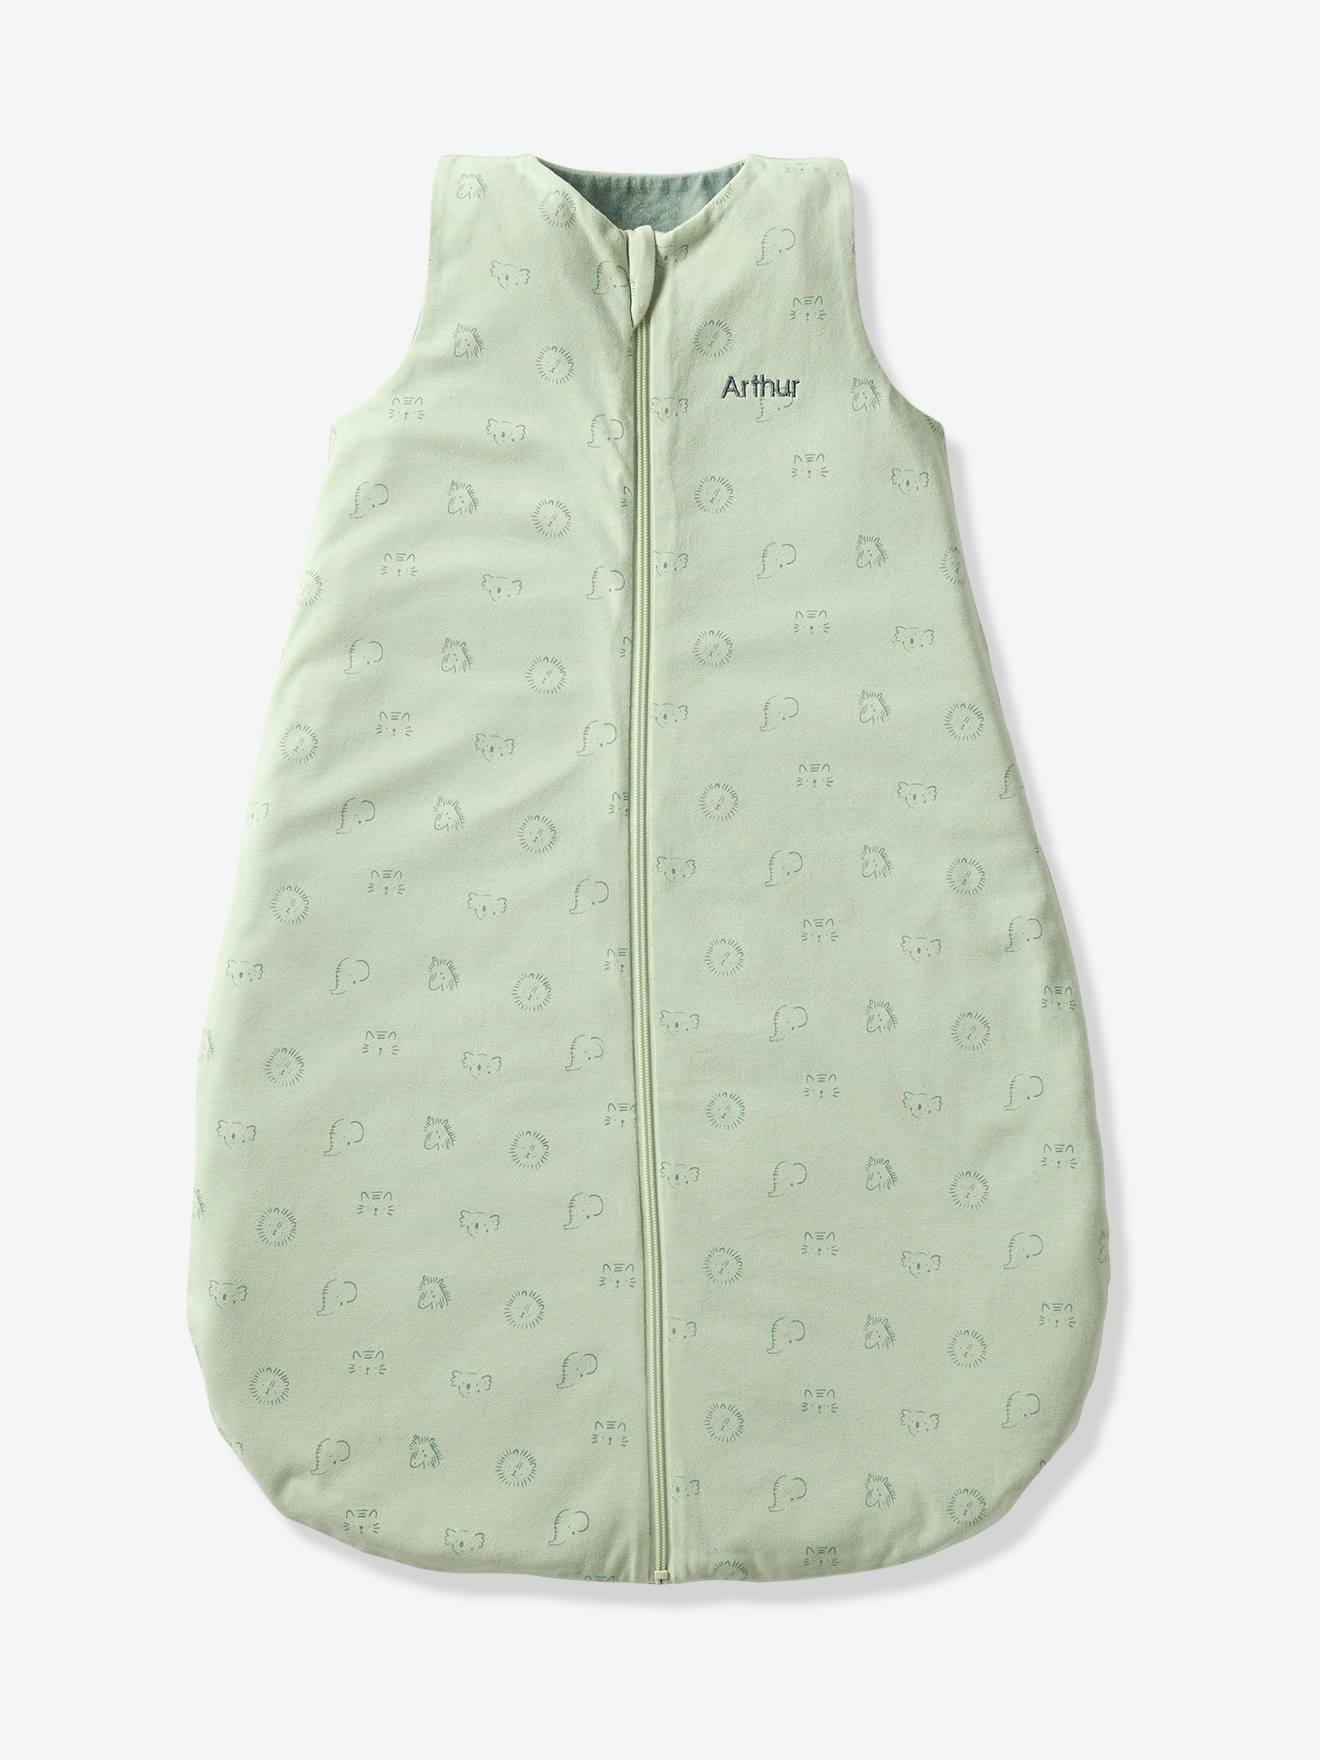 Essentials Summer Special Baby Sleeping Bag, Opens in the Middle, Bali printed green